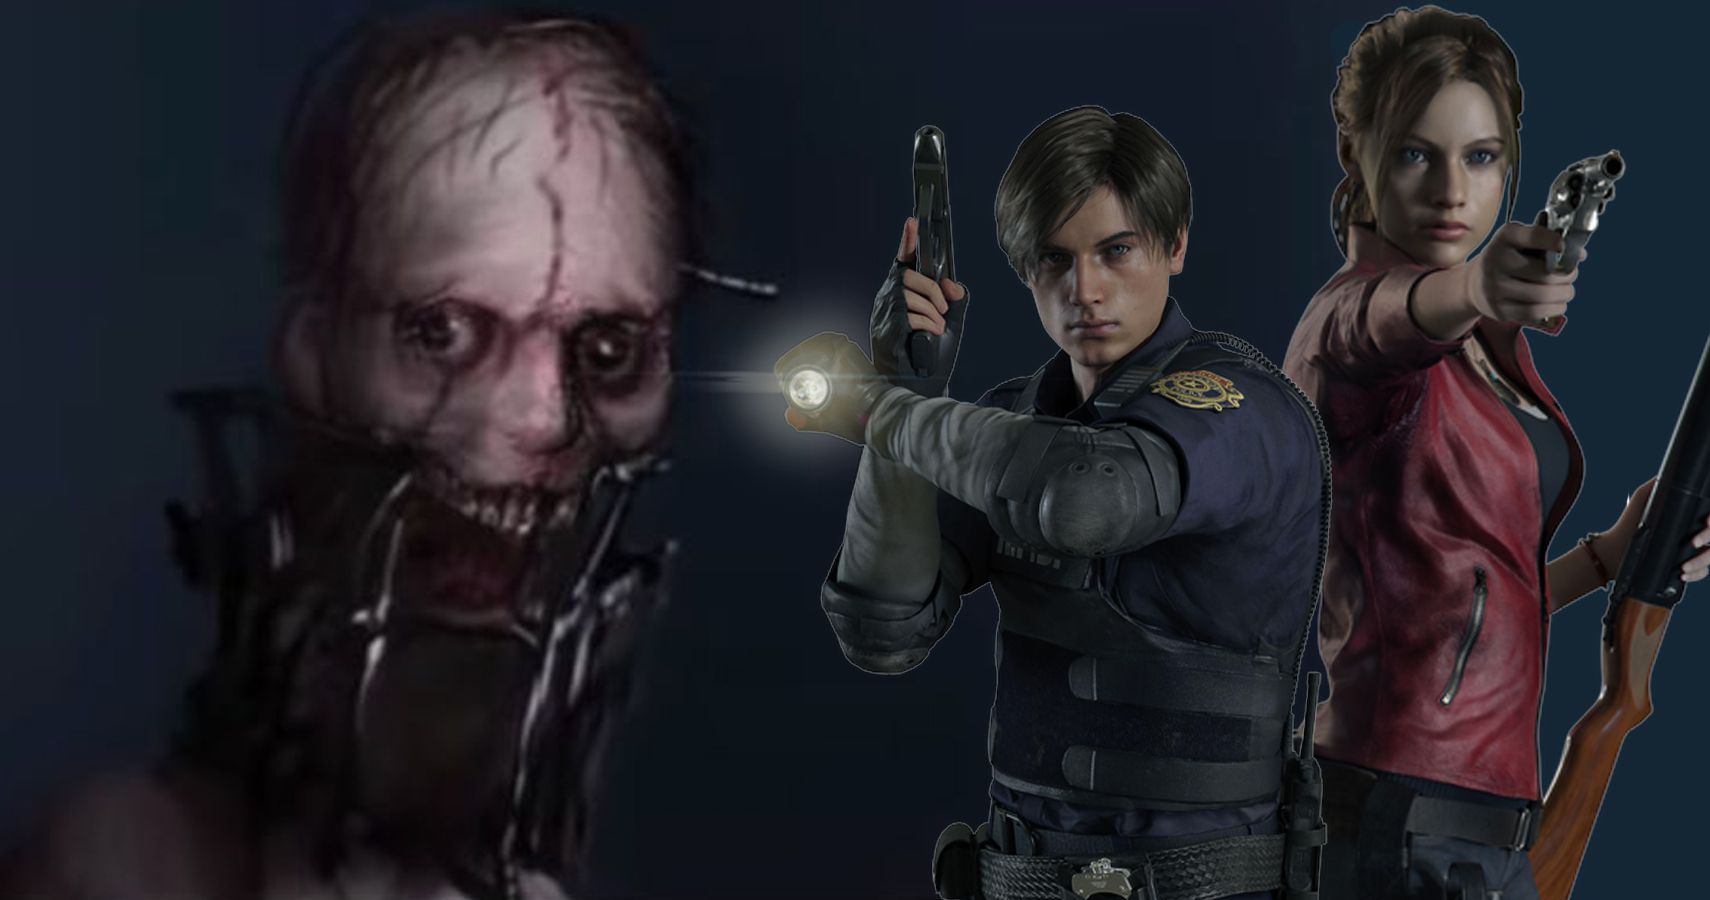 This Scrapped Enemy Idea From The Resident Evil 2 Remake Will Give You